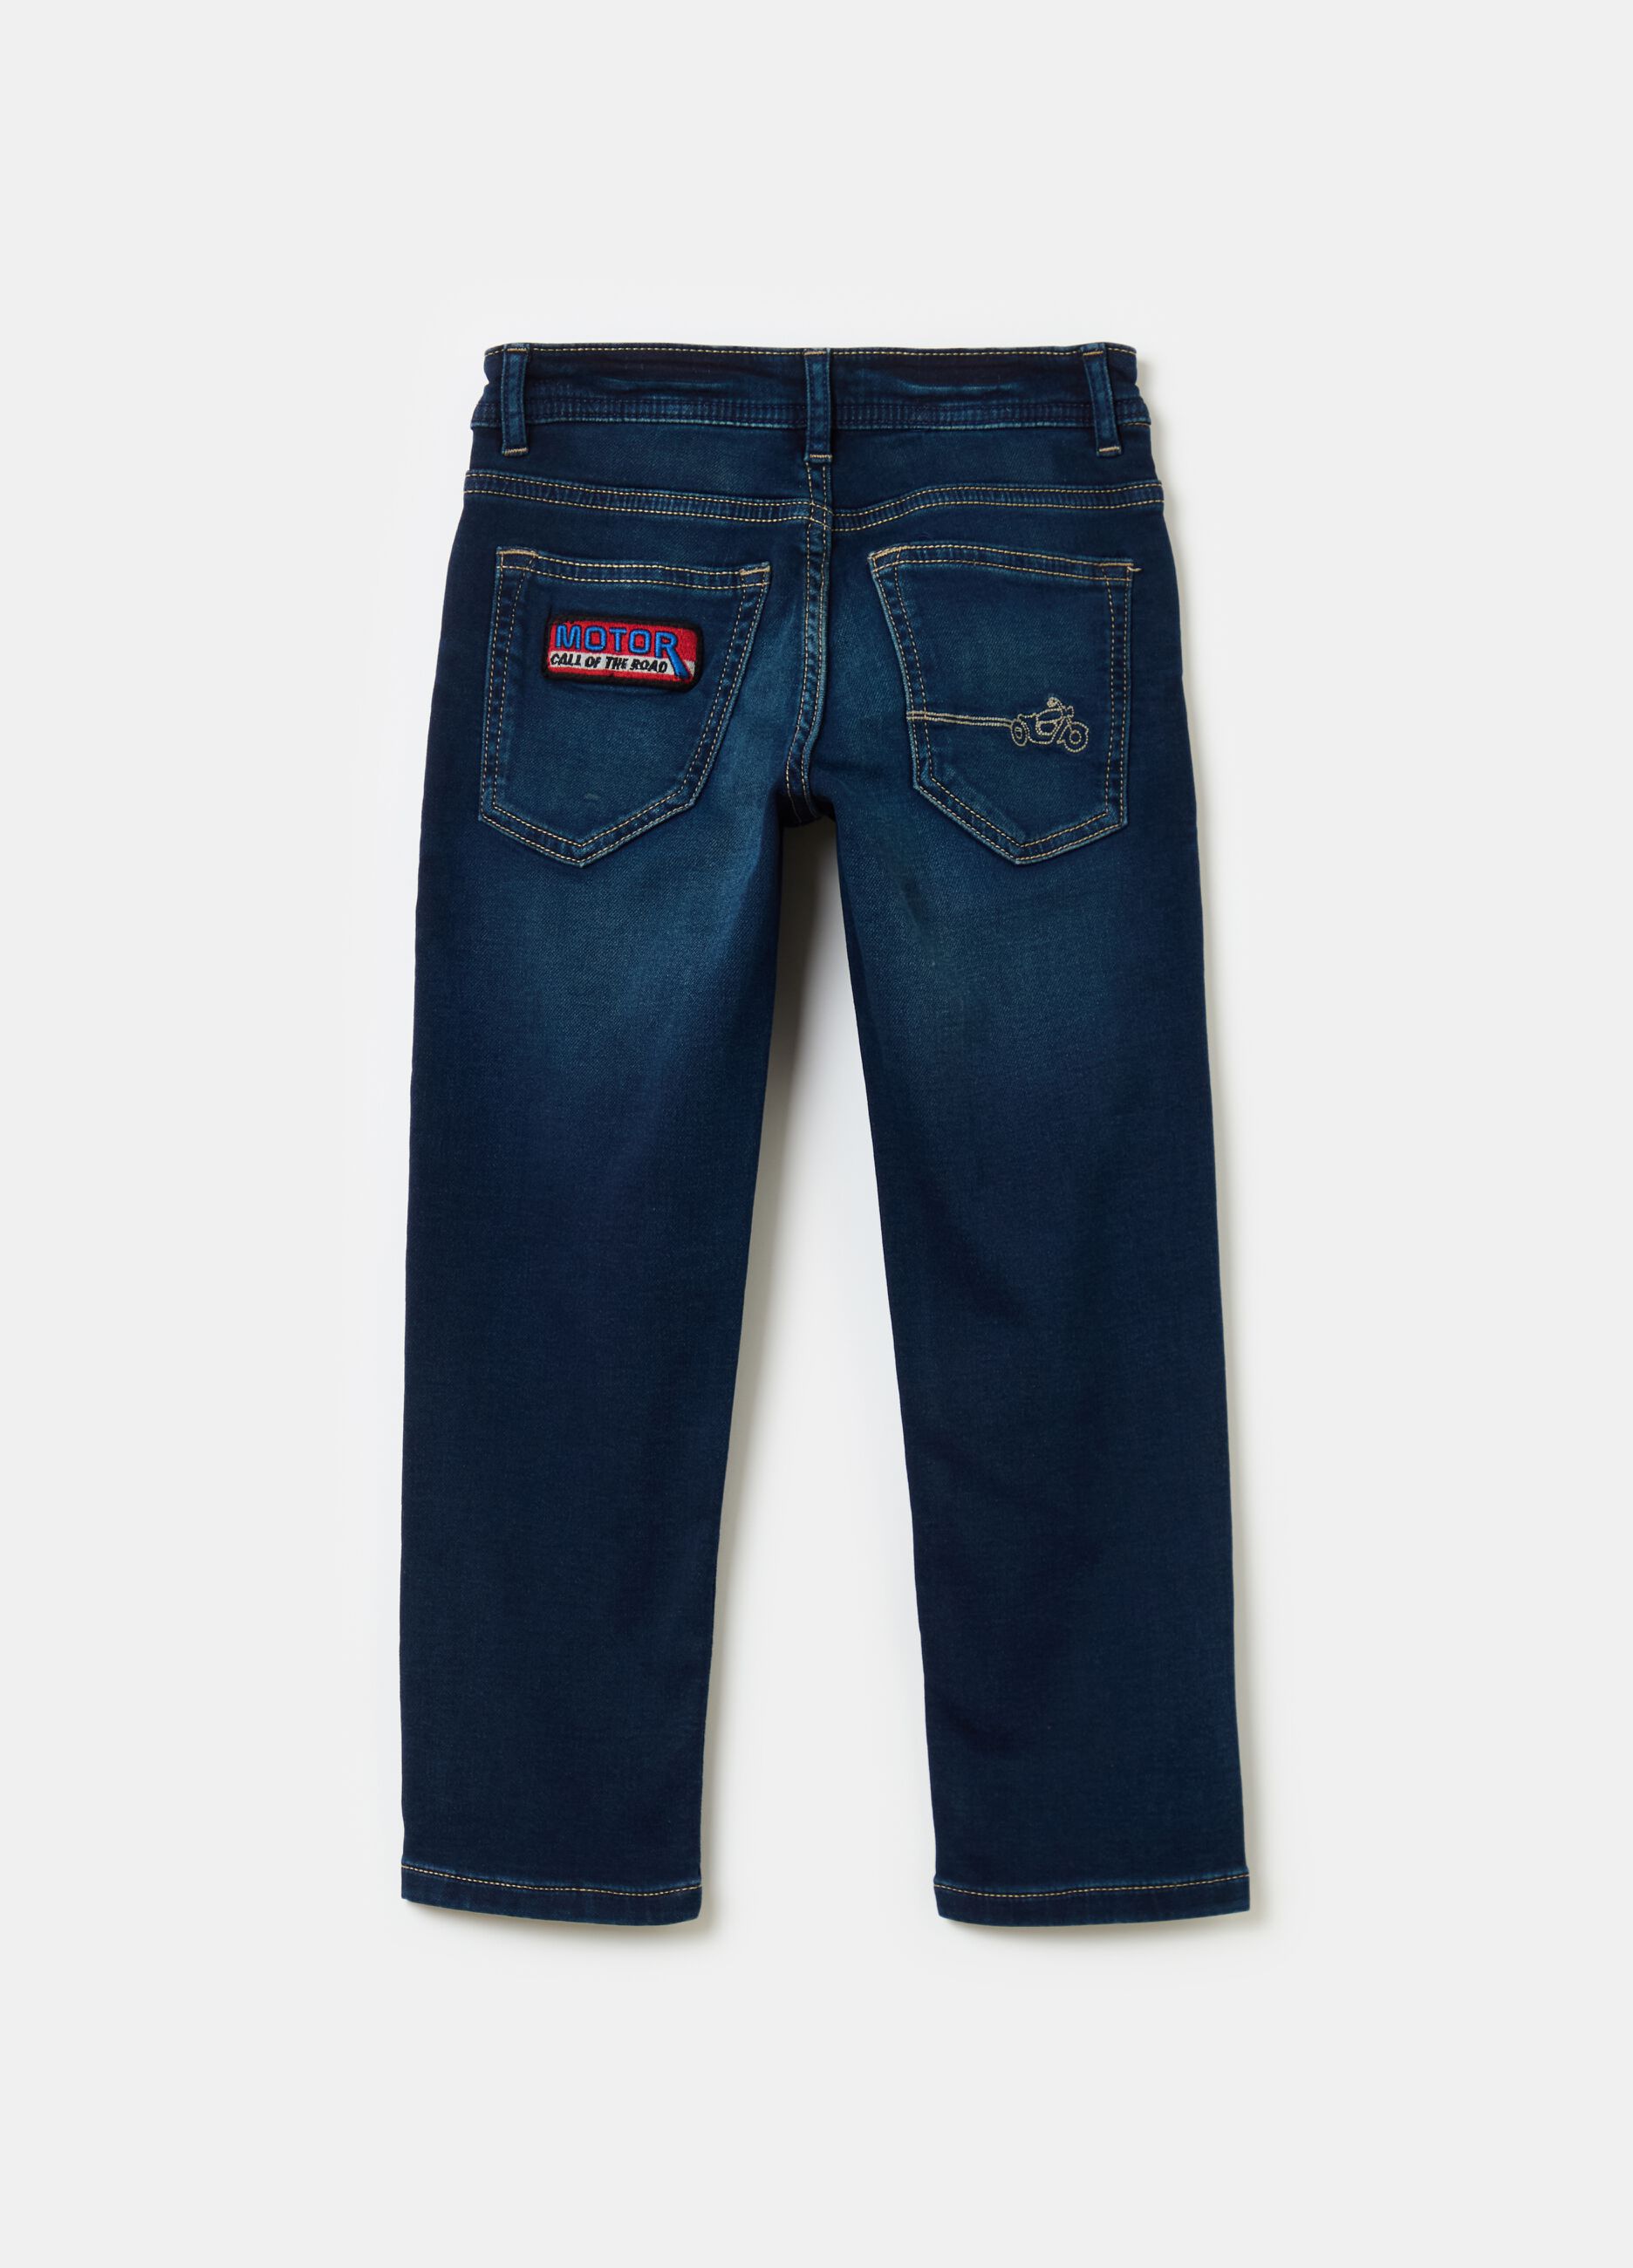 Jeans regular fit patch e ricamo motorcycle